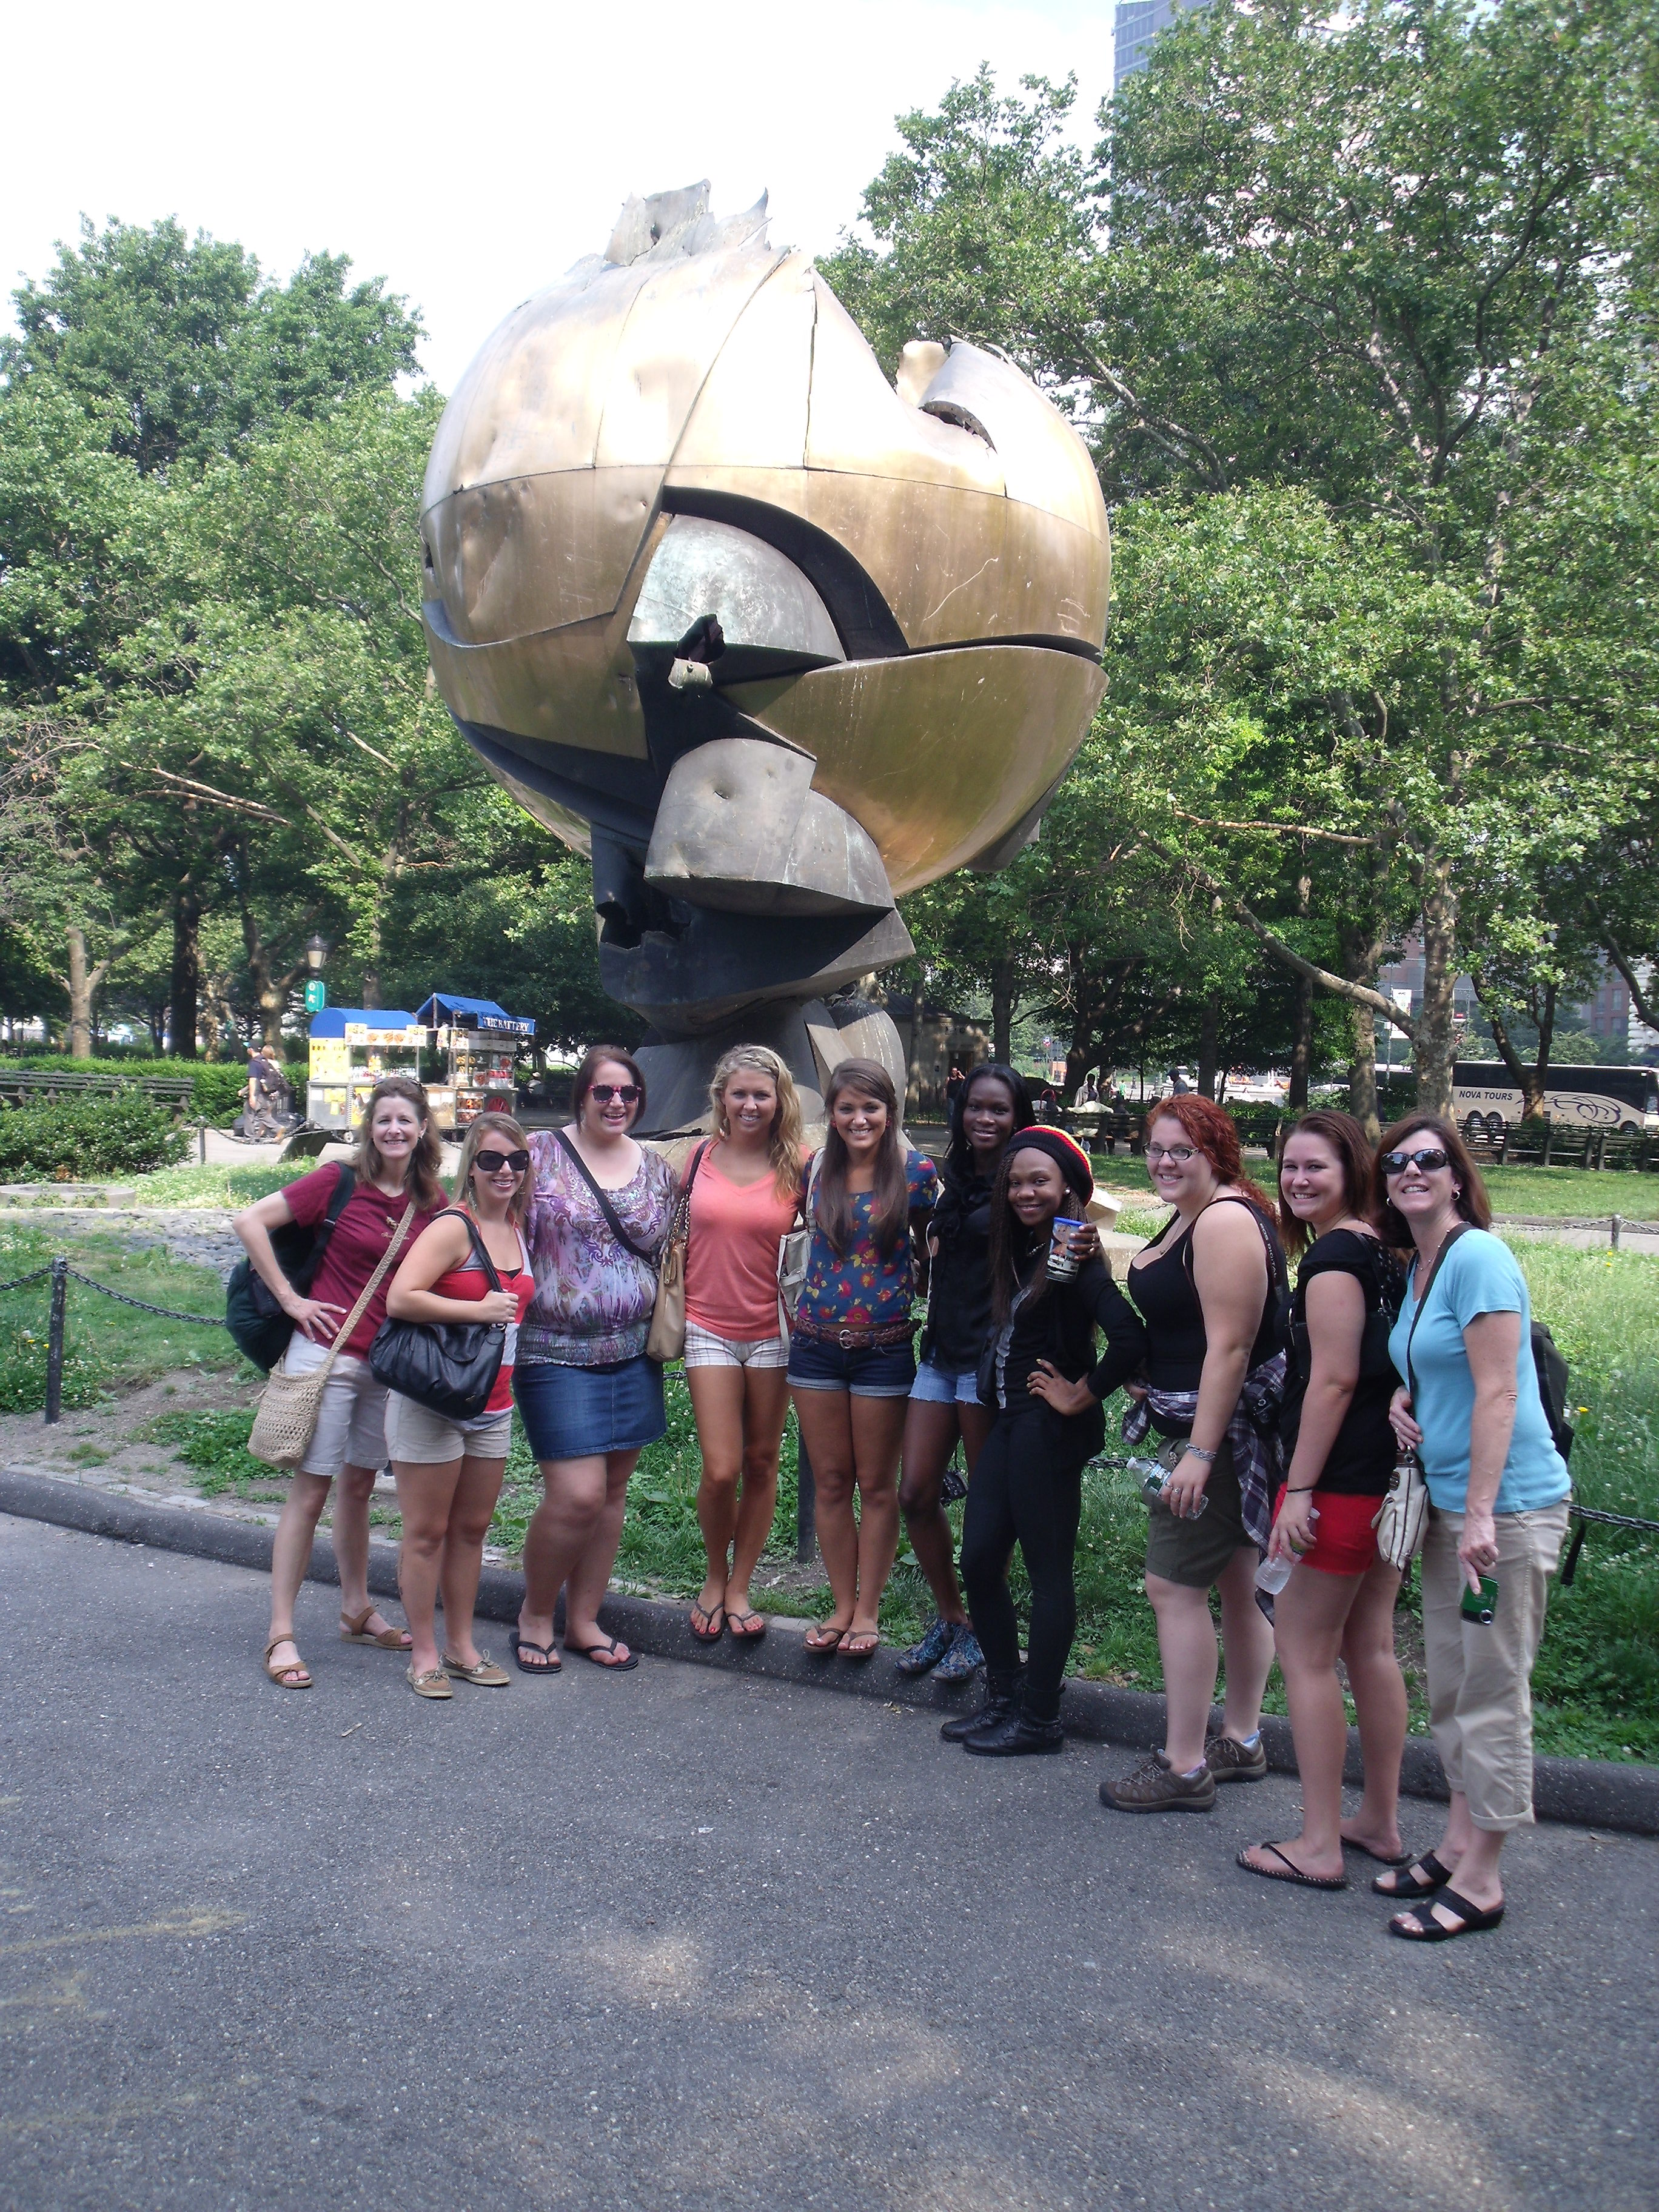 A group shot in front of the 9/11 sculpture.